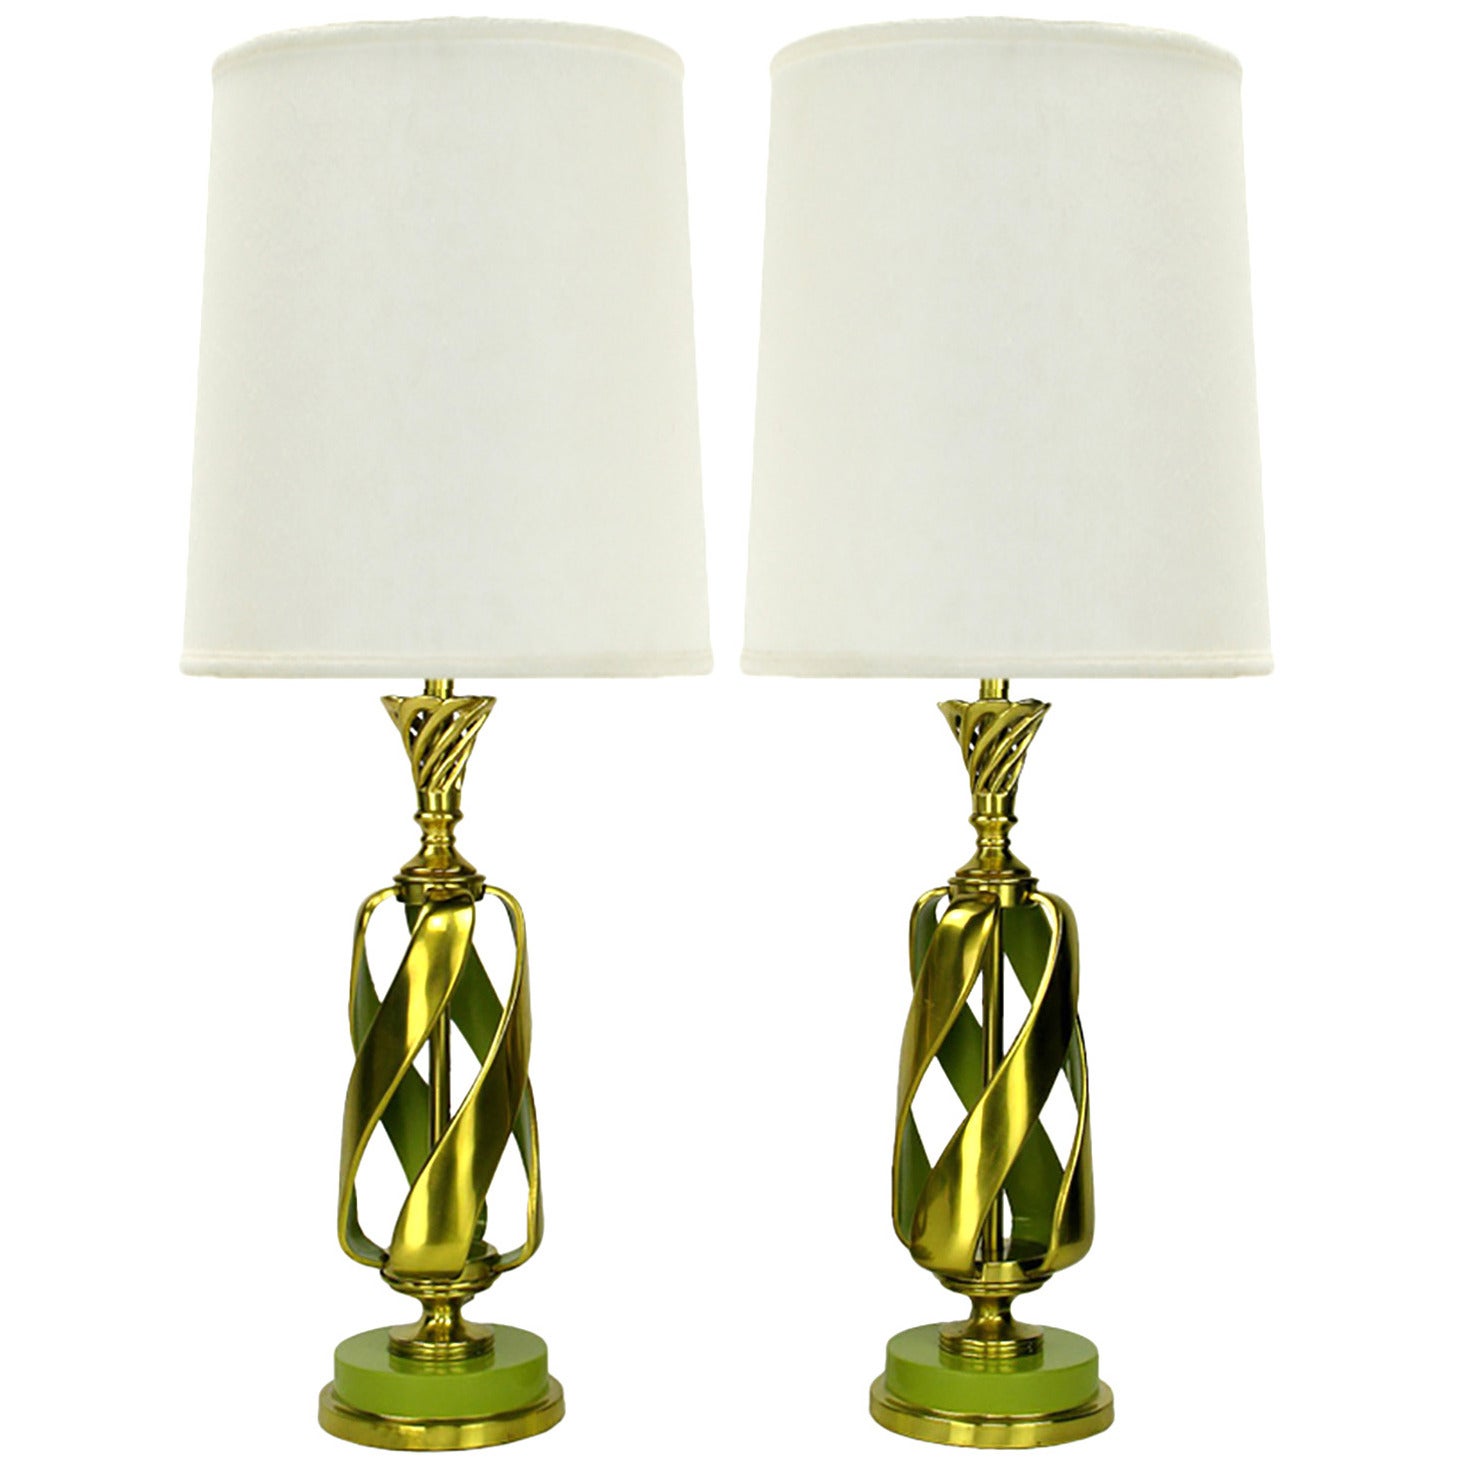 Pair of Rembrandt Stylized Pineapple Form Brass & Chartreuse Lacquer Table Lamps